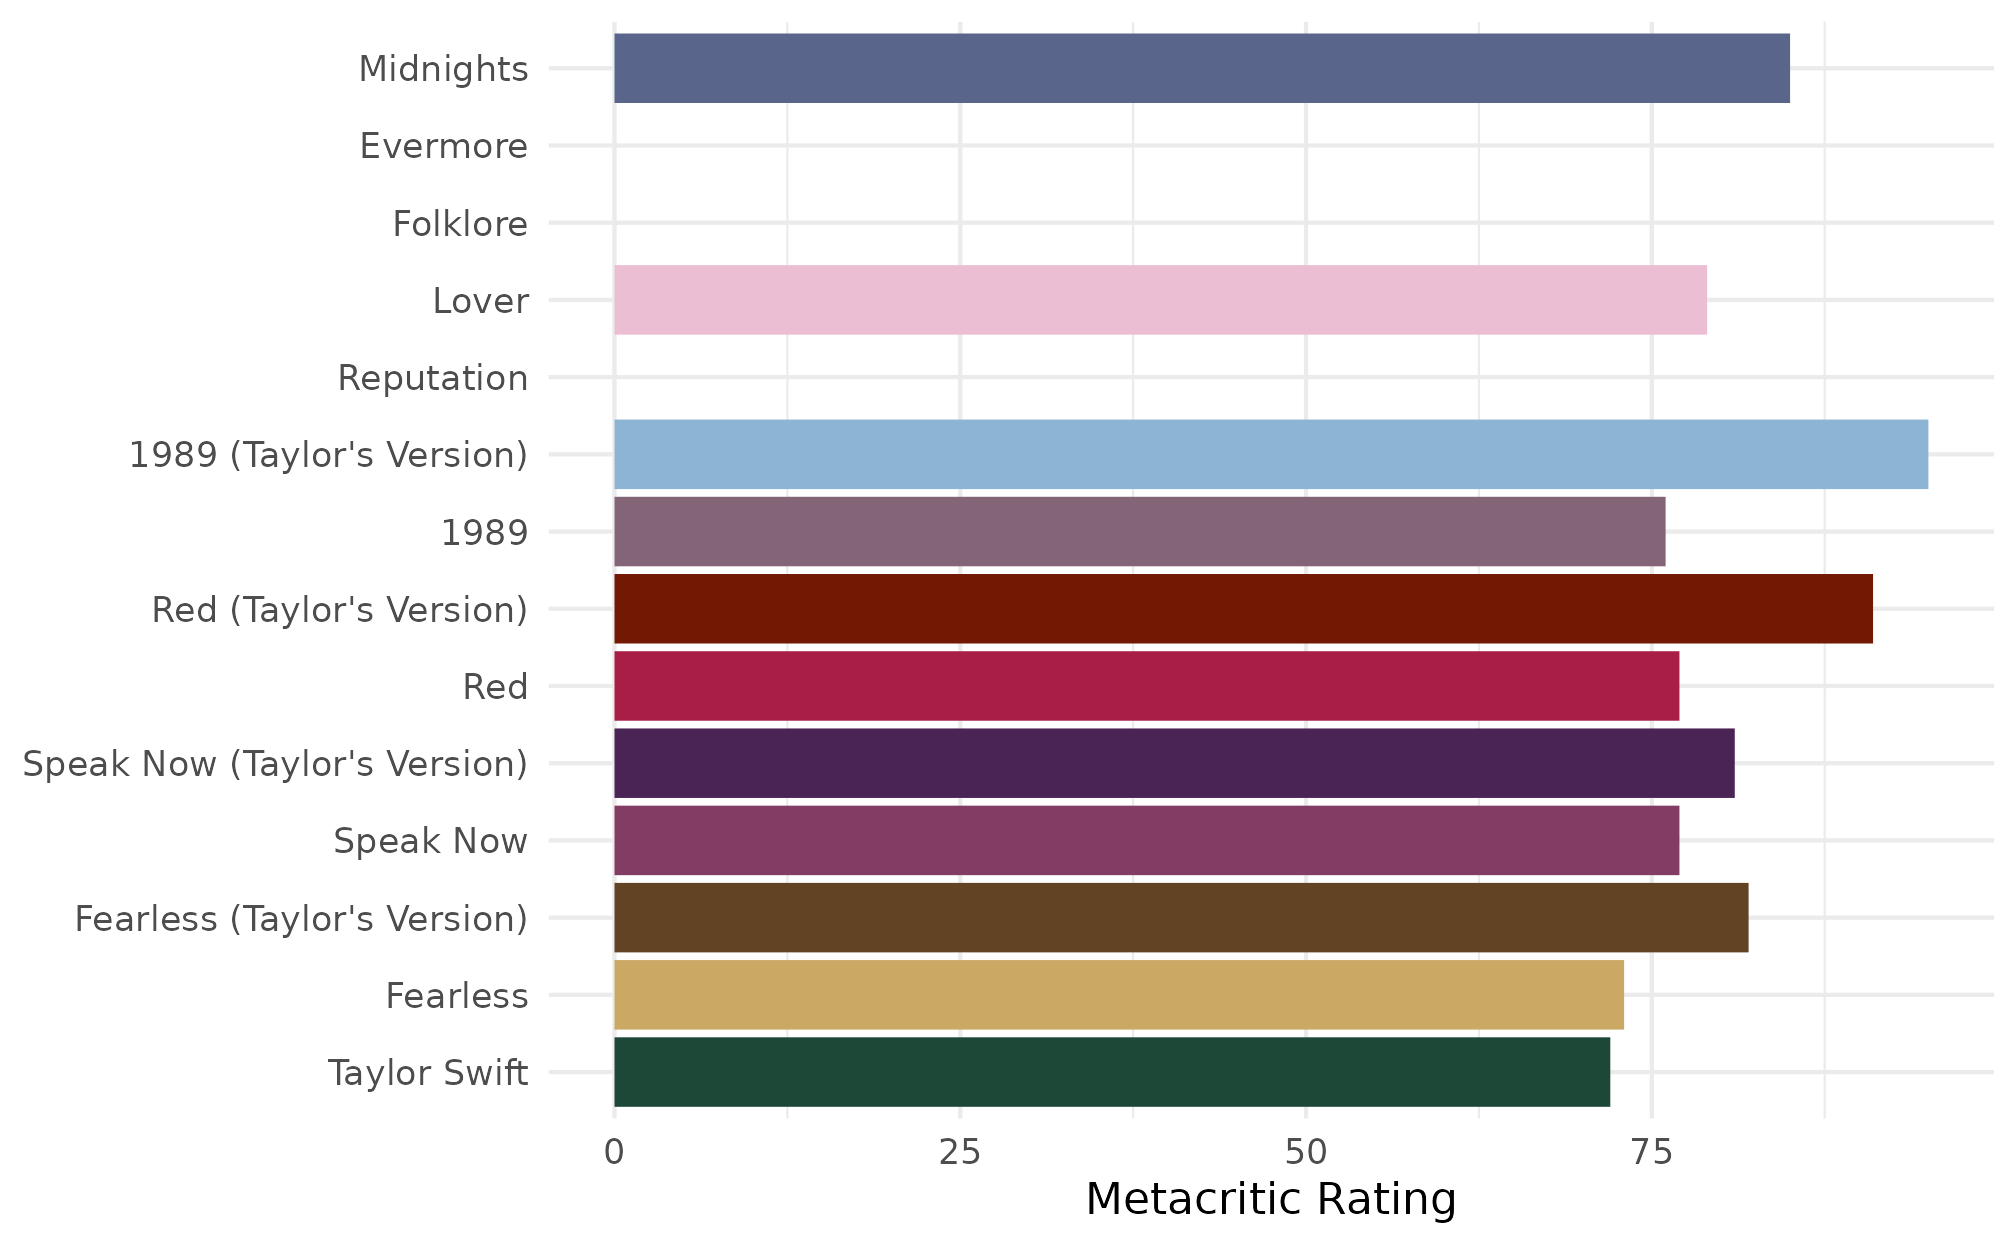 A bar graph with the Metacritic rating on the x-axis and the album name on the y-axis. Color has been assigned to each bar such that each bar is filled with a color. The colors for each bar a based on the ablum cover. On y-axis, evermore, folklore, and repuation, have been spelled in title case, rather than lower case, resulting in no bar showing for these albums.